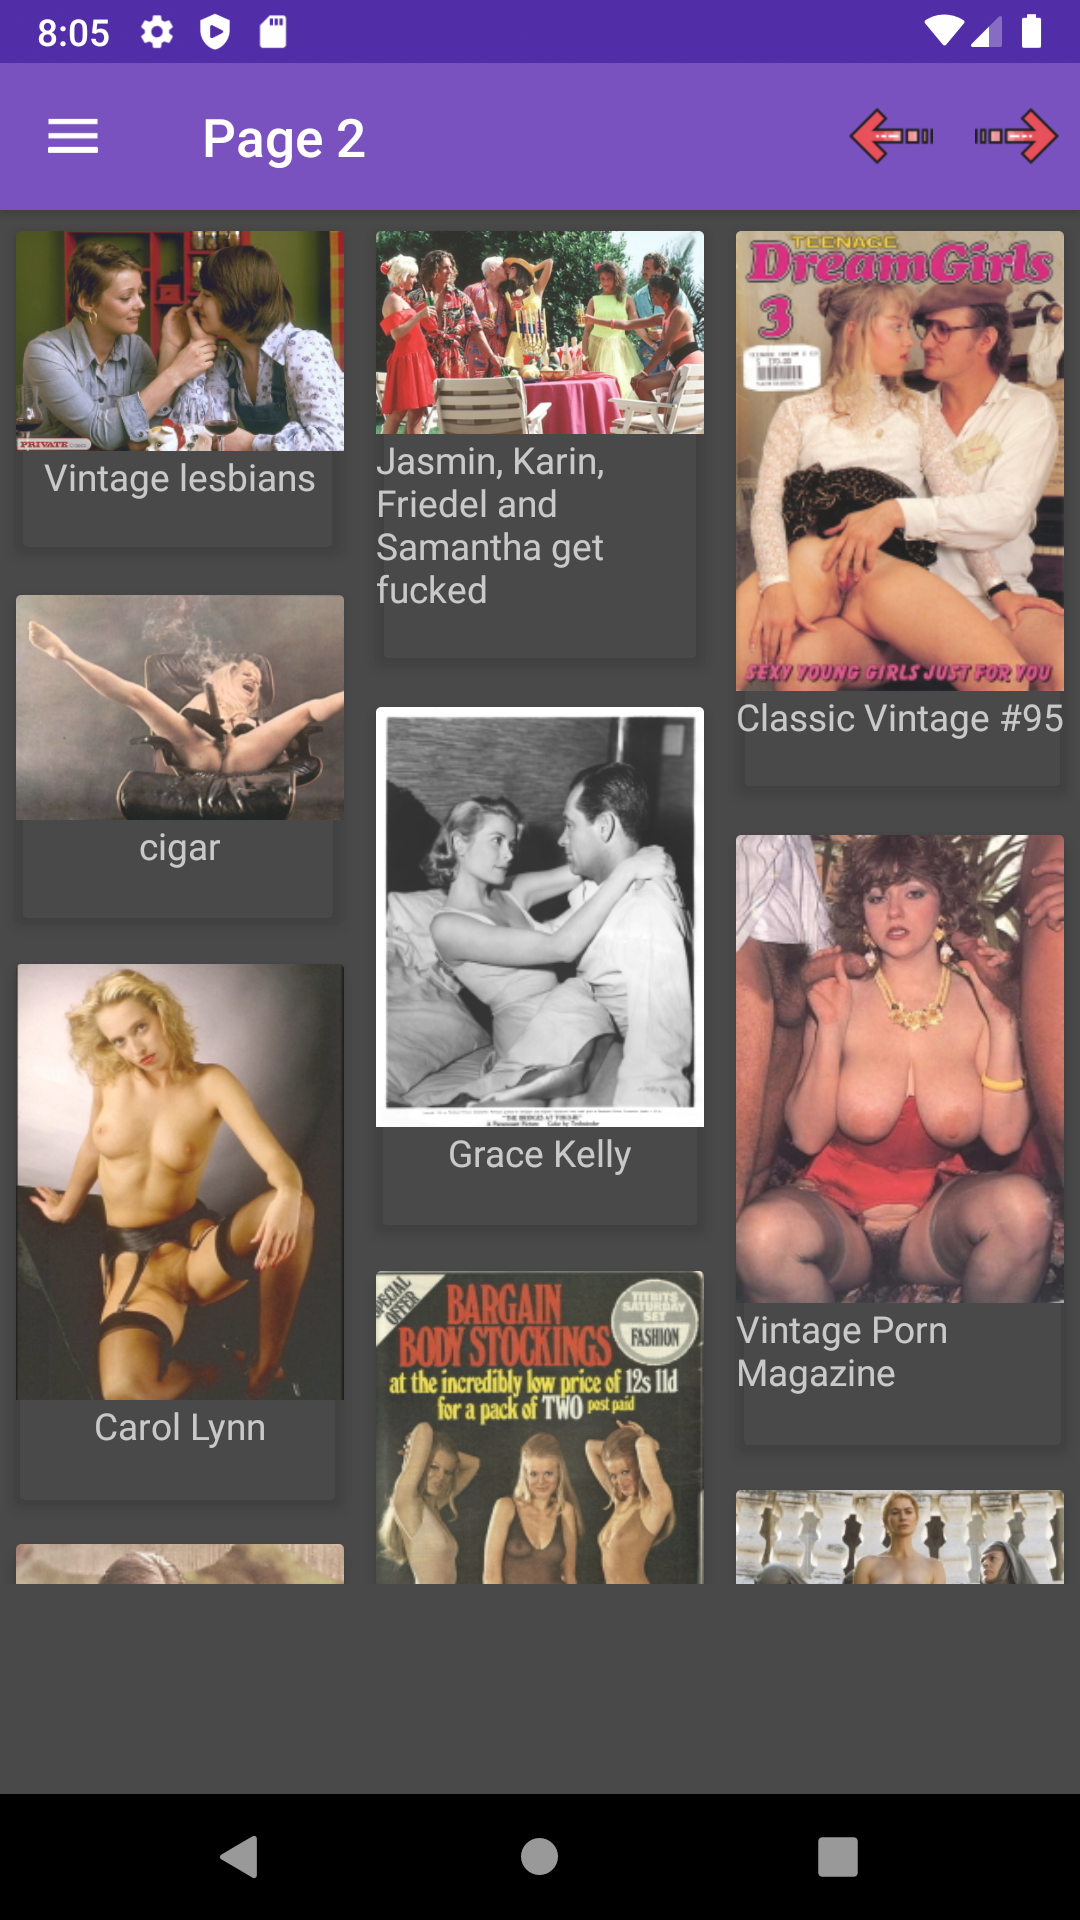 Vintage Porn apps,porn,image,game,best,sexy,cuckhold,femboy,pornstars,hot,apk,hentay,strapon,download,puzzle,manga,photo,eroticwallpapers,adult,galleries,hantai,hentai